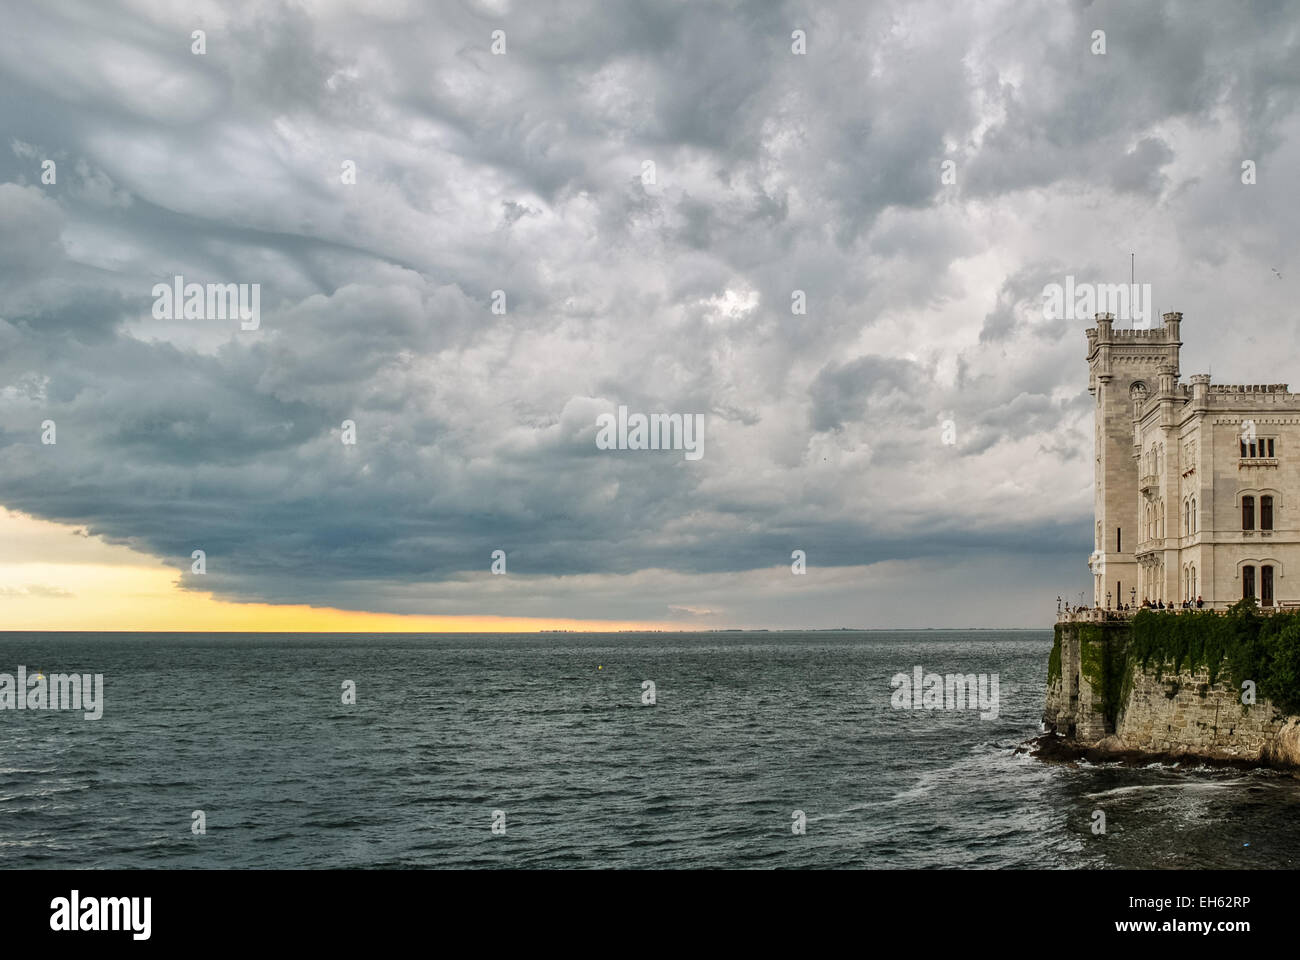 A storm approaching the 'Miramare Castle', in Trieste, during the afternoon of 26 may 2013 Stock Photo